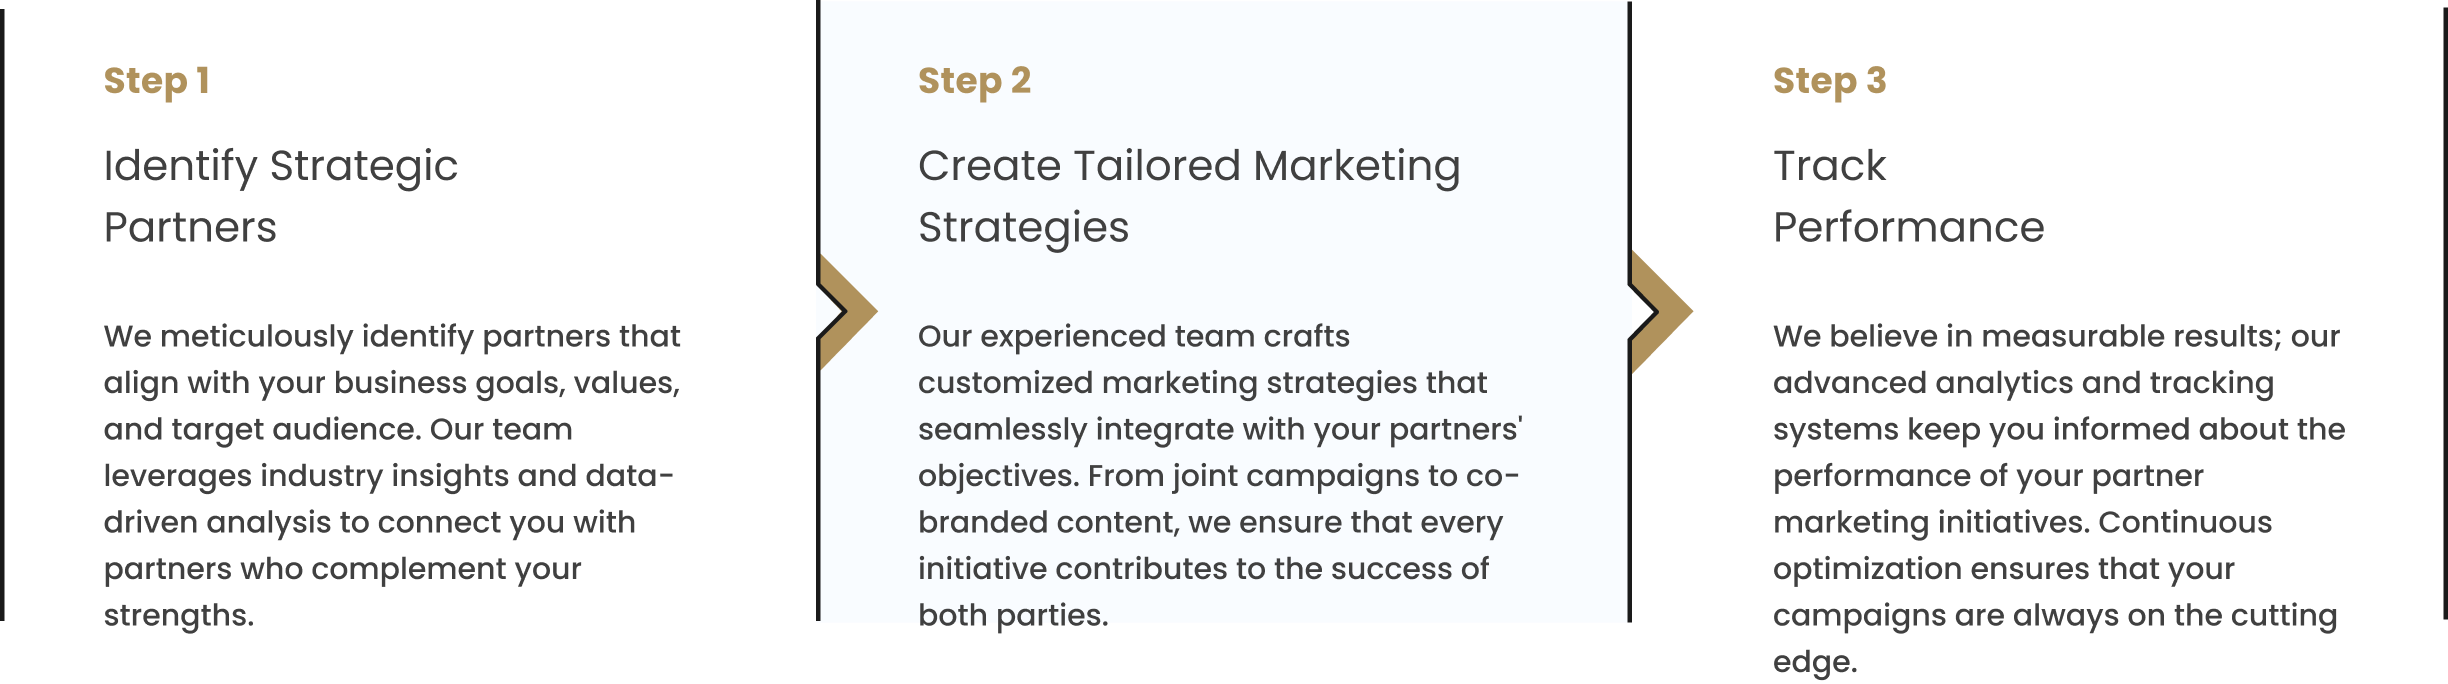 eMa's Approach to Partner Marketing